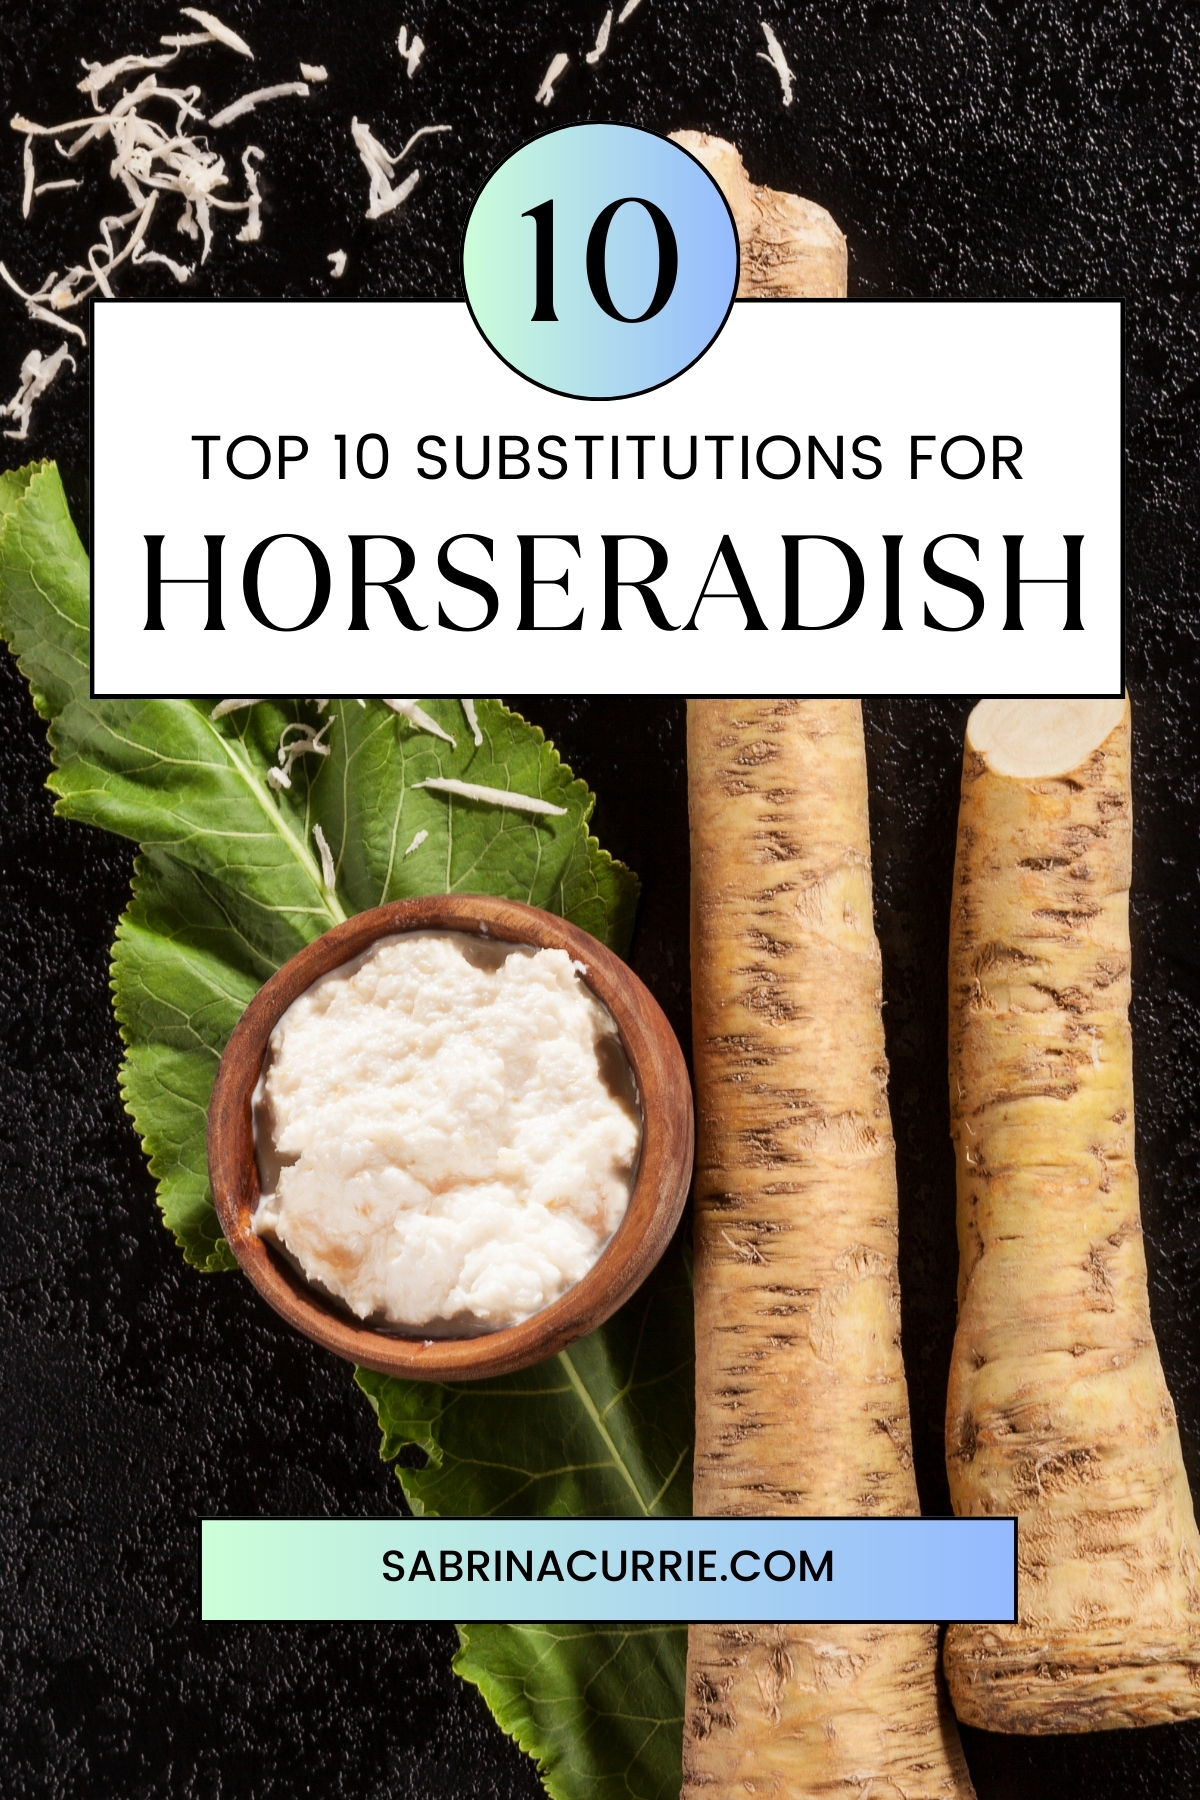 Title, Top 10 substitutions for horseradish", on a white banner over a tall Pinterest sized photo of fresh horseradish root and grated white horseradish.